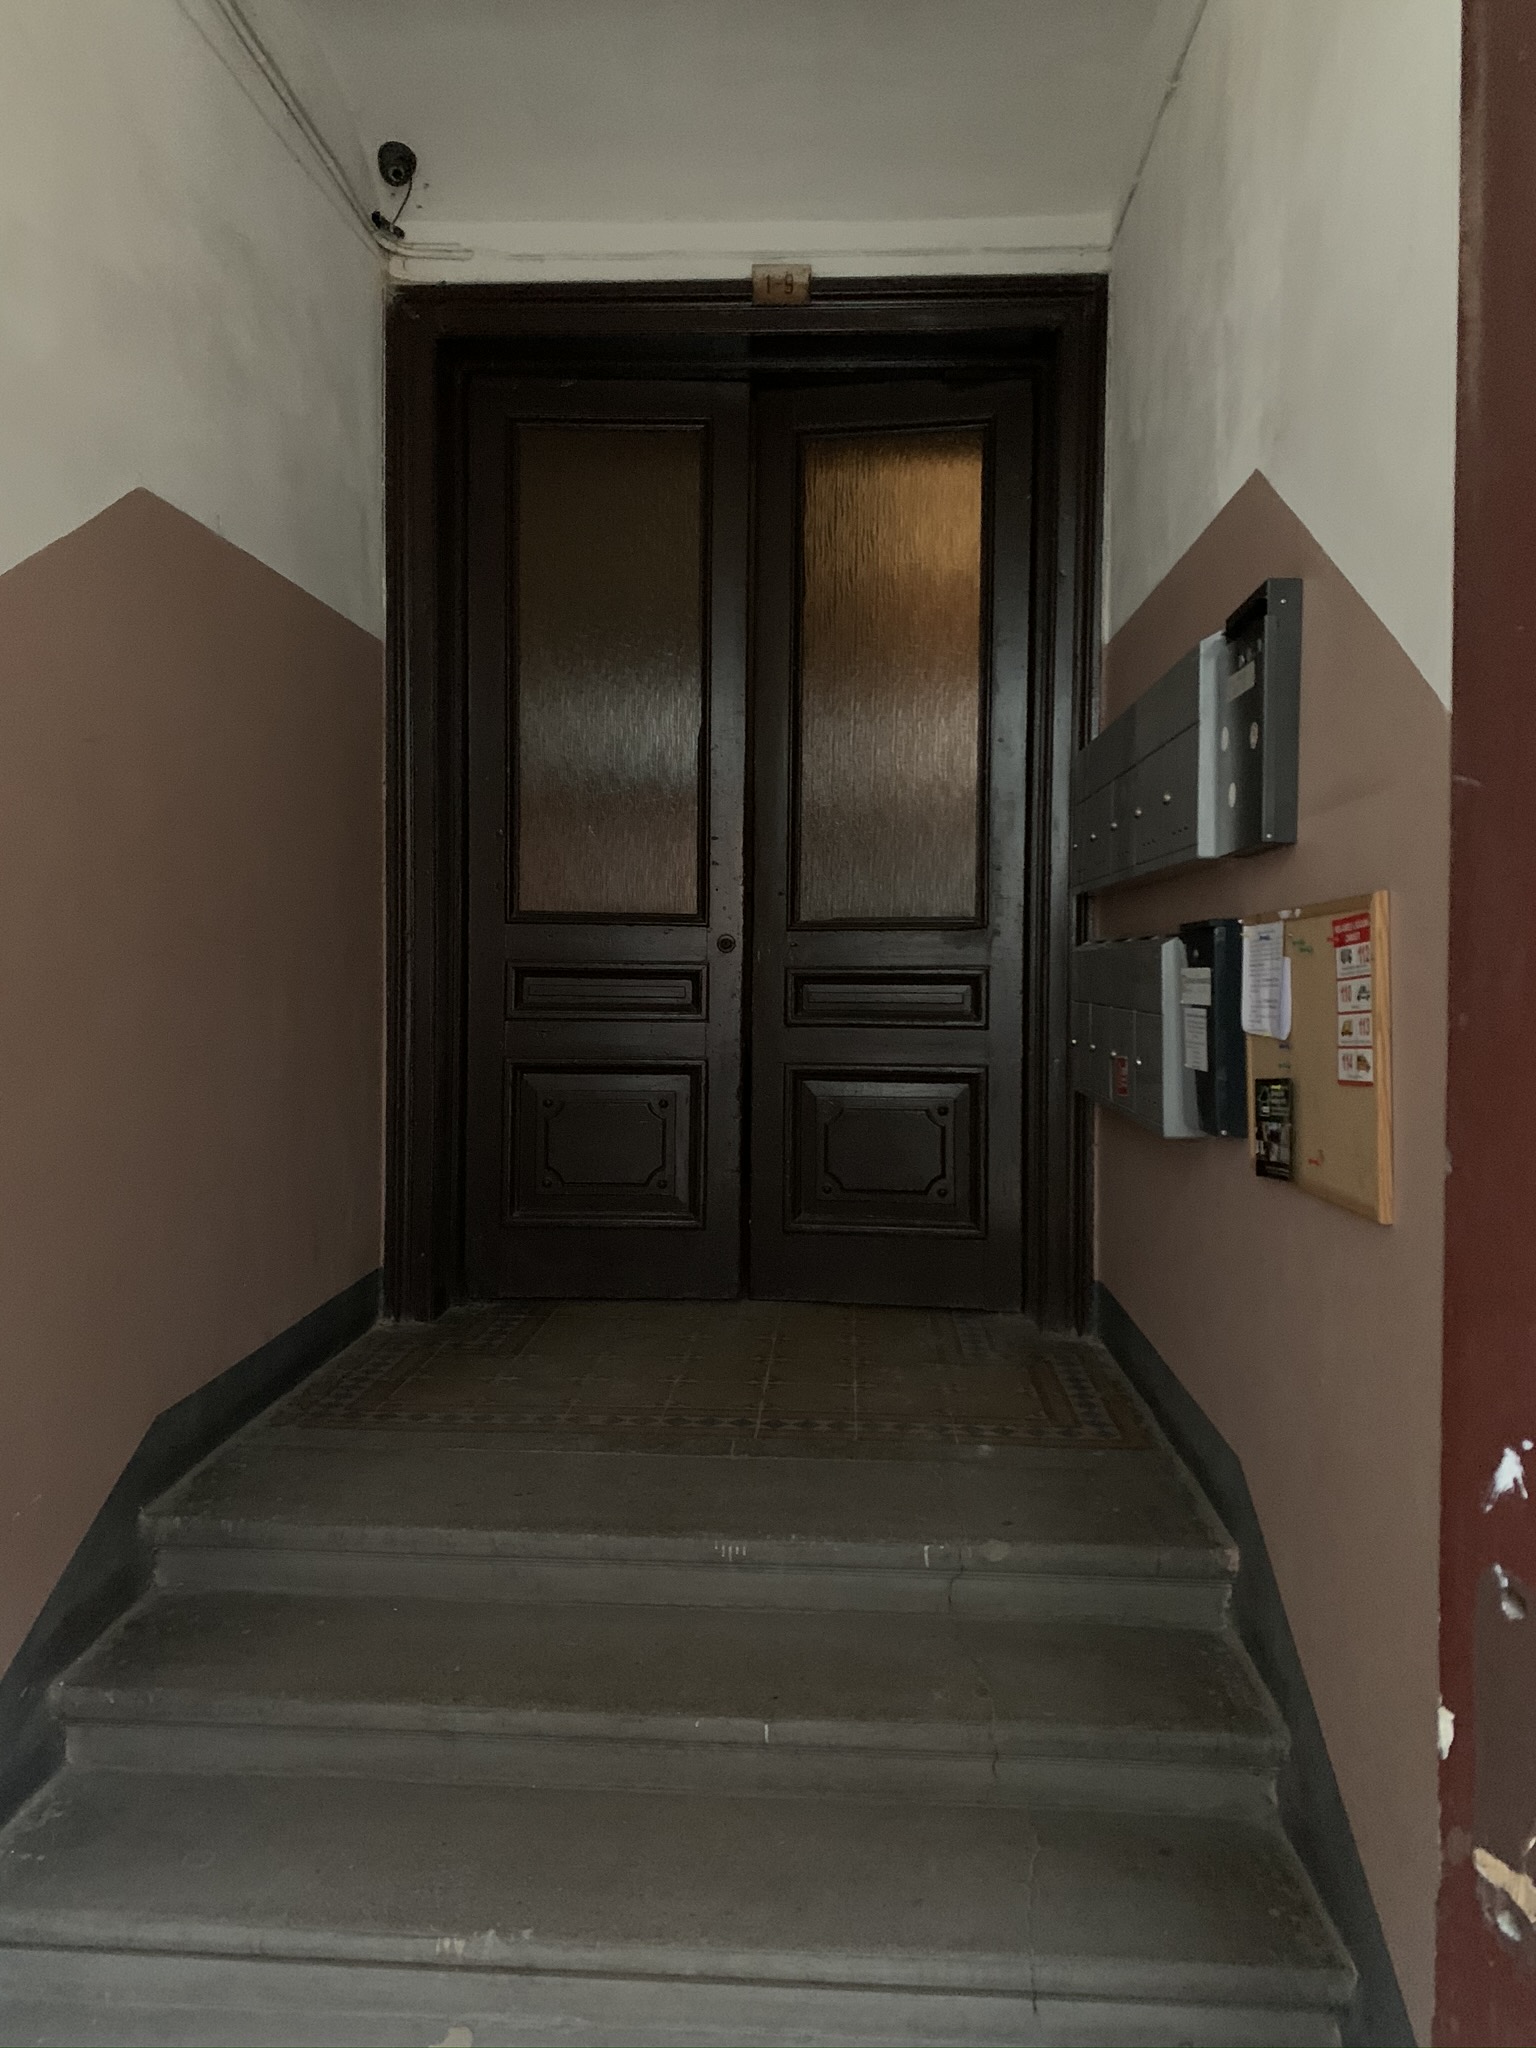 Office for sale, Stabu street - Image 1